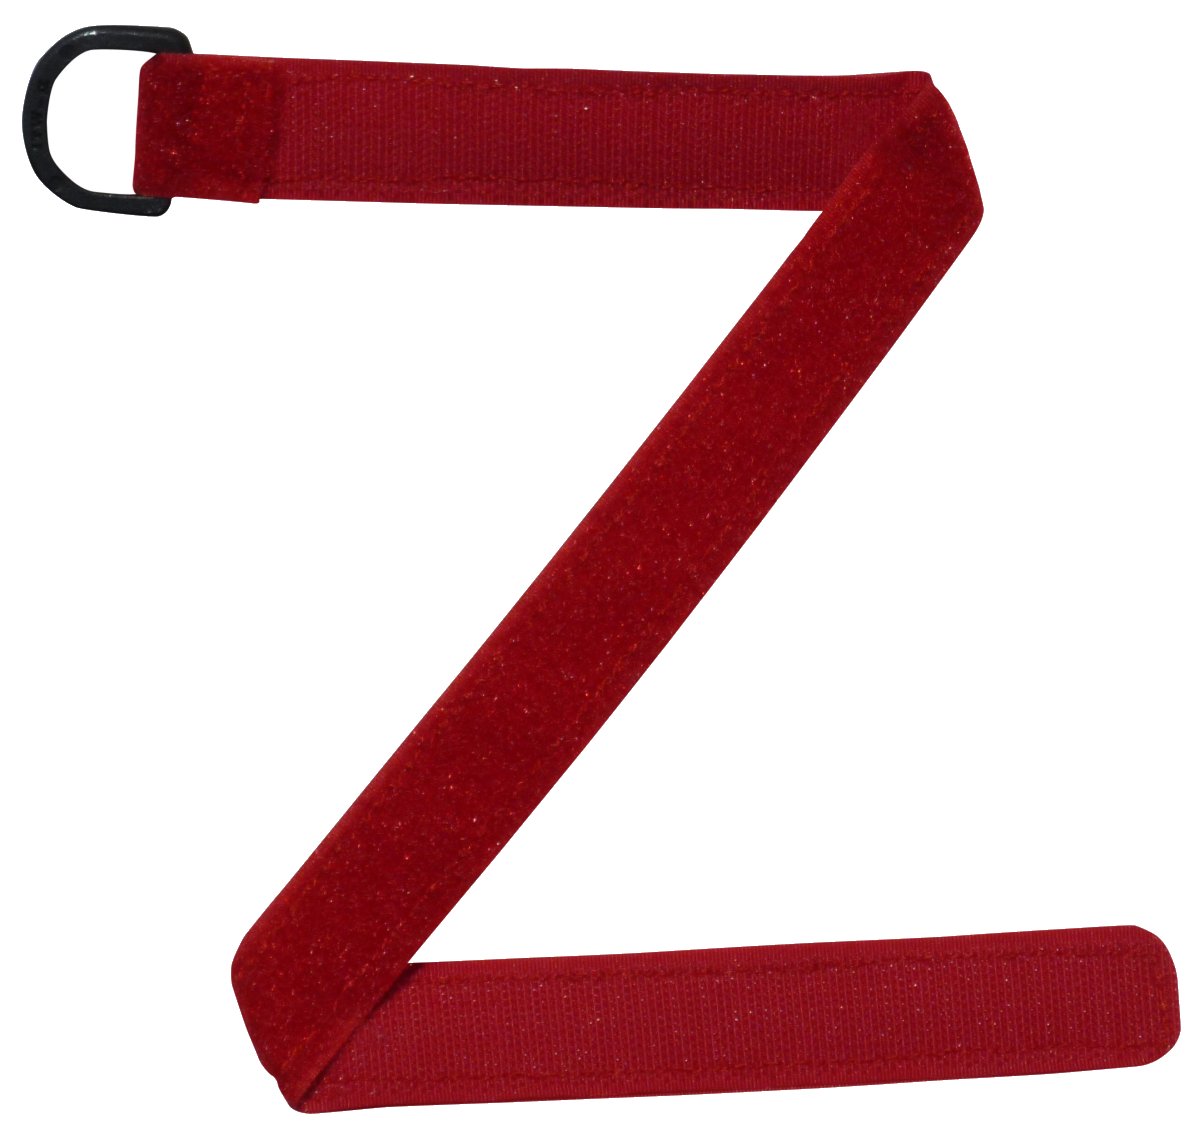 Benristraps 25mm back to back hook & loop strap in red with D ring (pair)